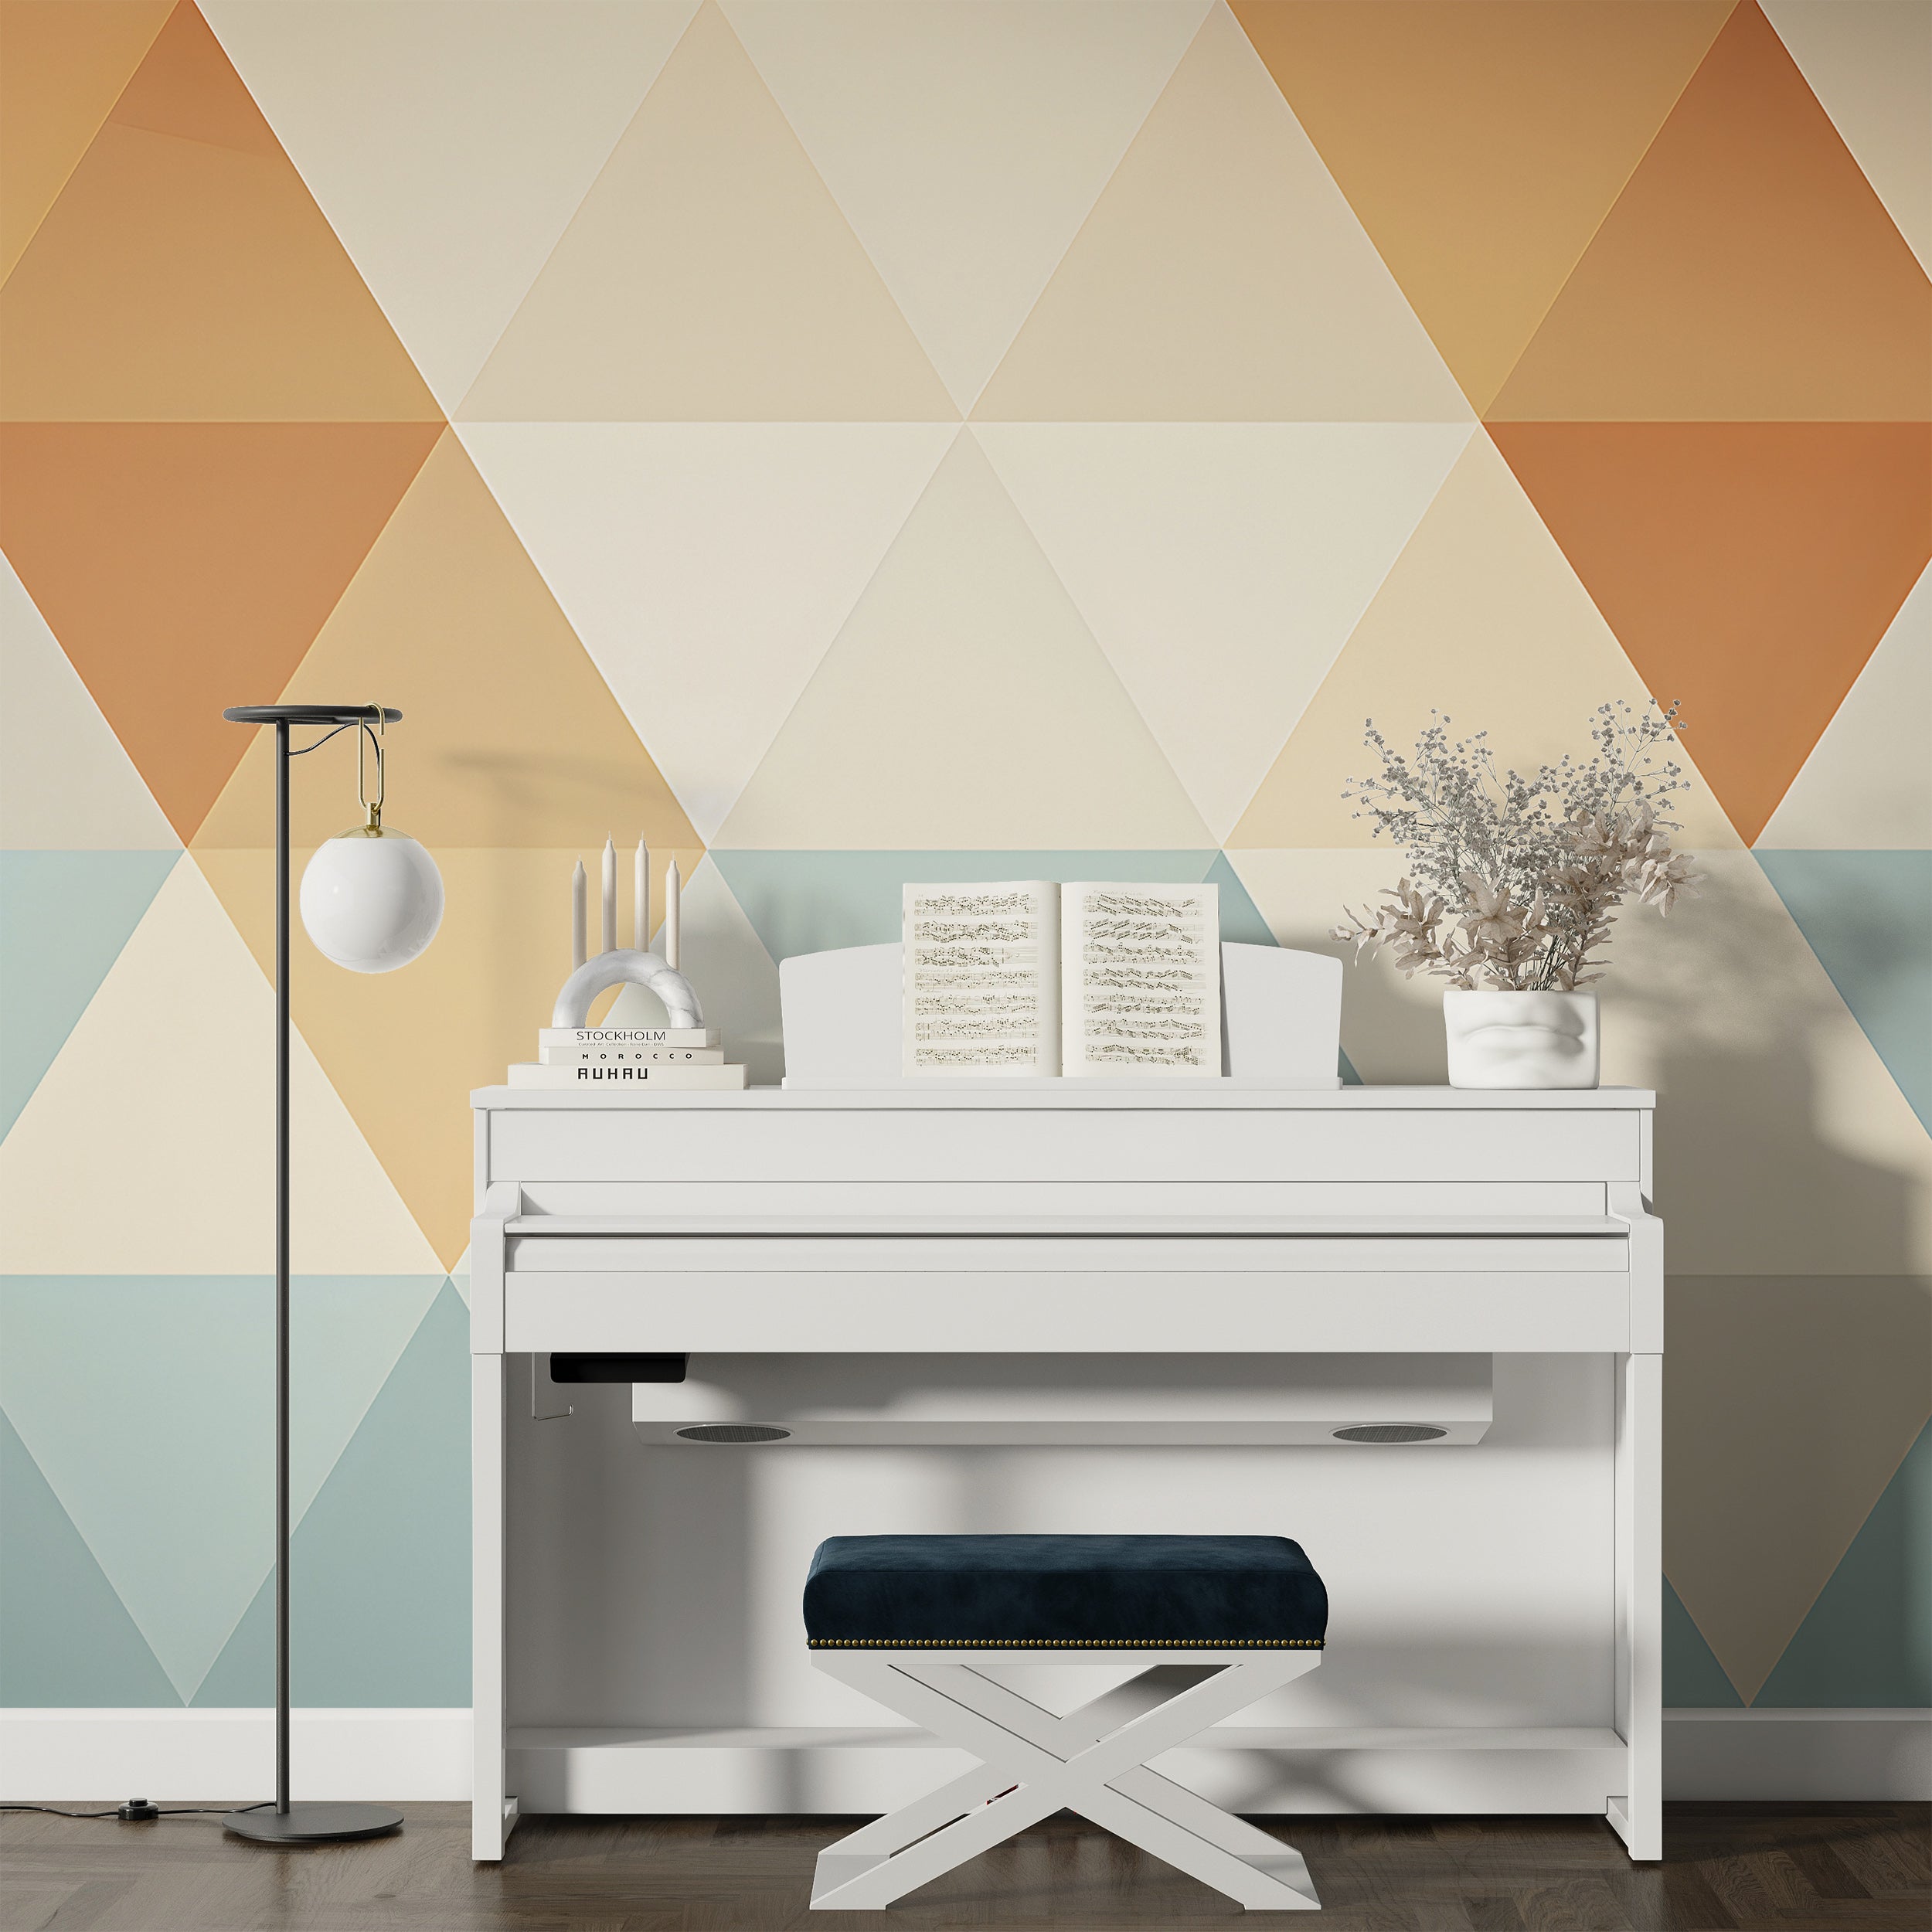 Transform Your Space with Triangle Art